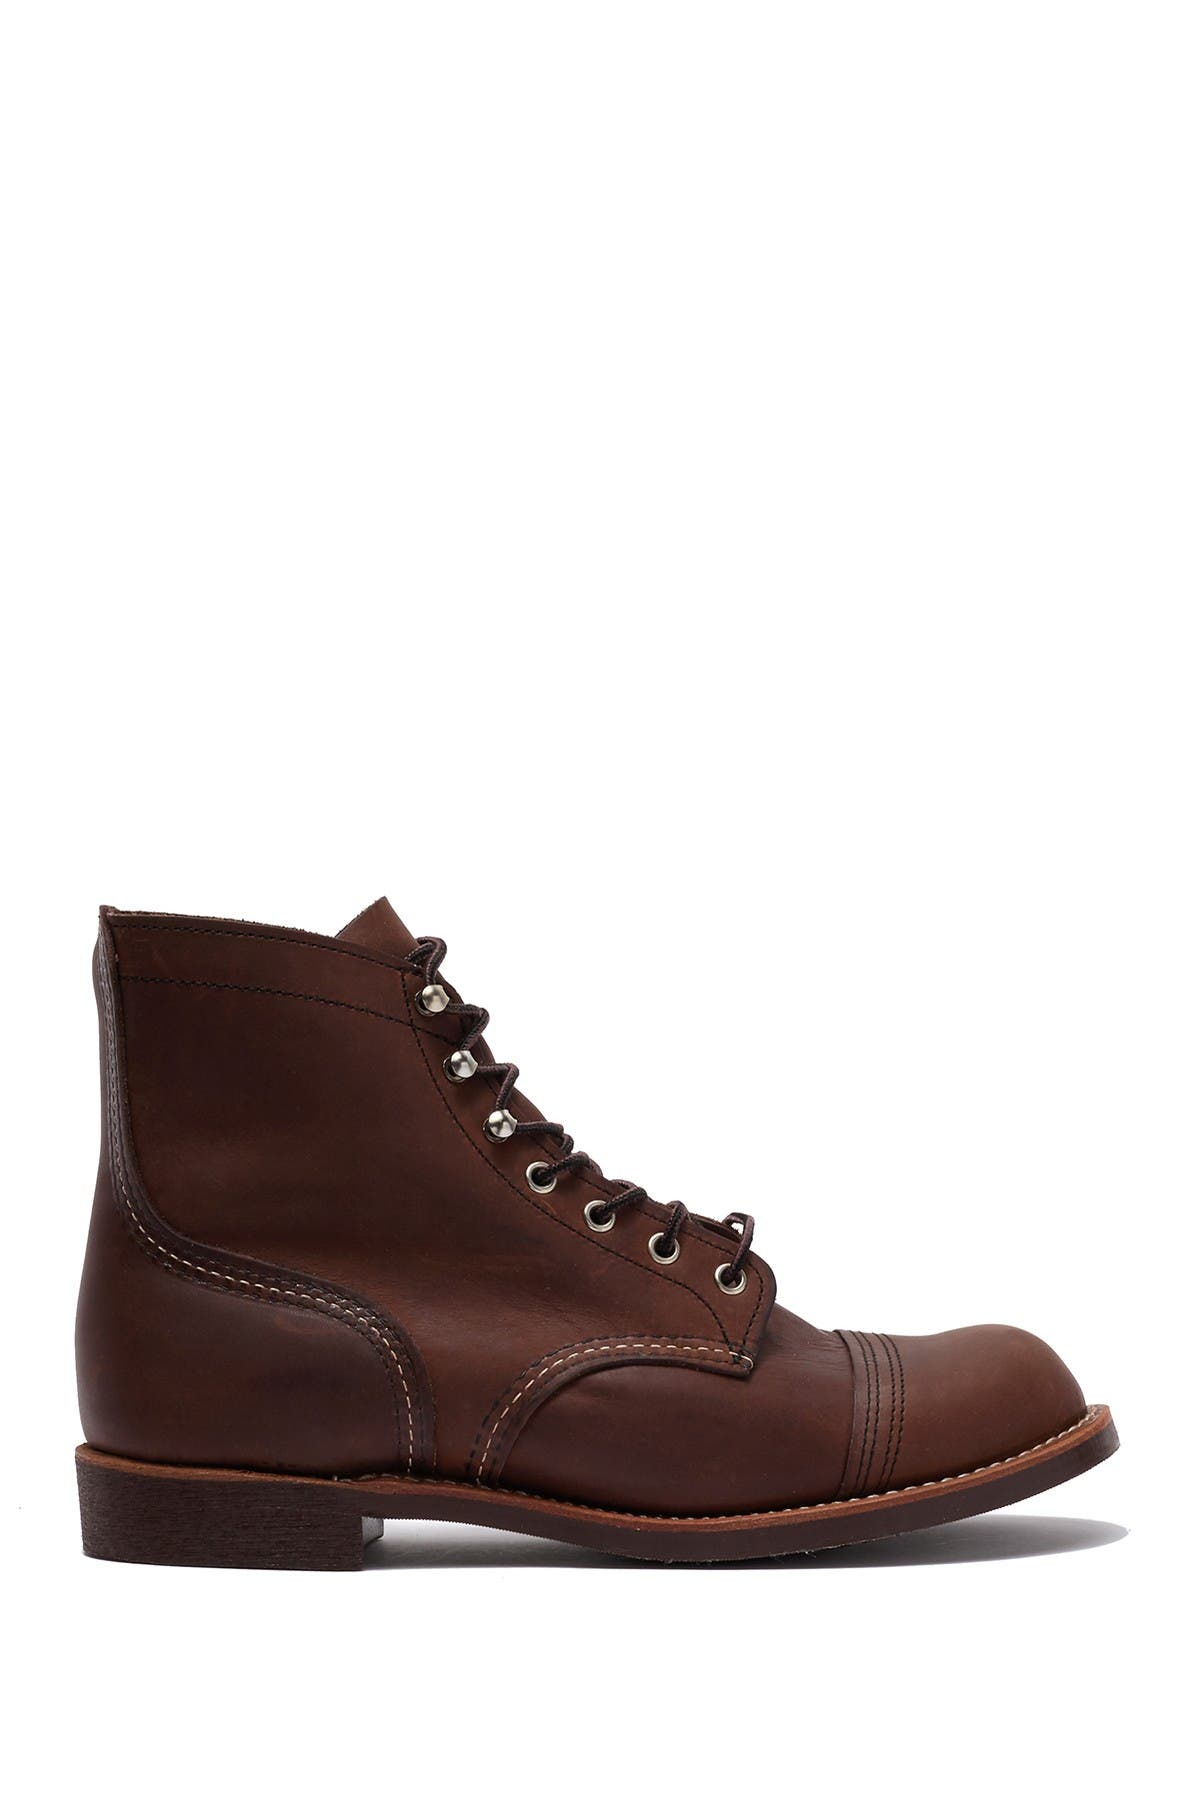 red wing iron ranger seconds